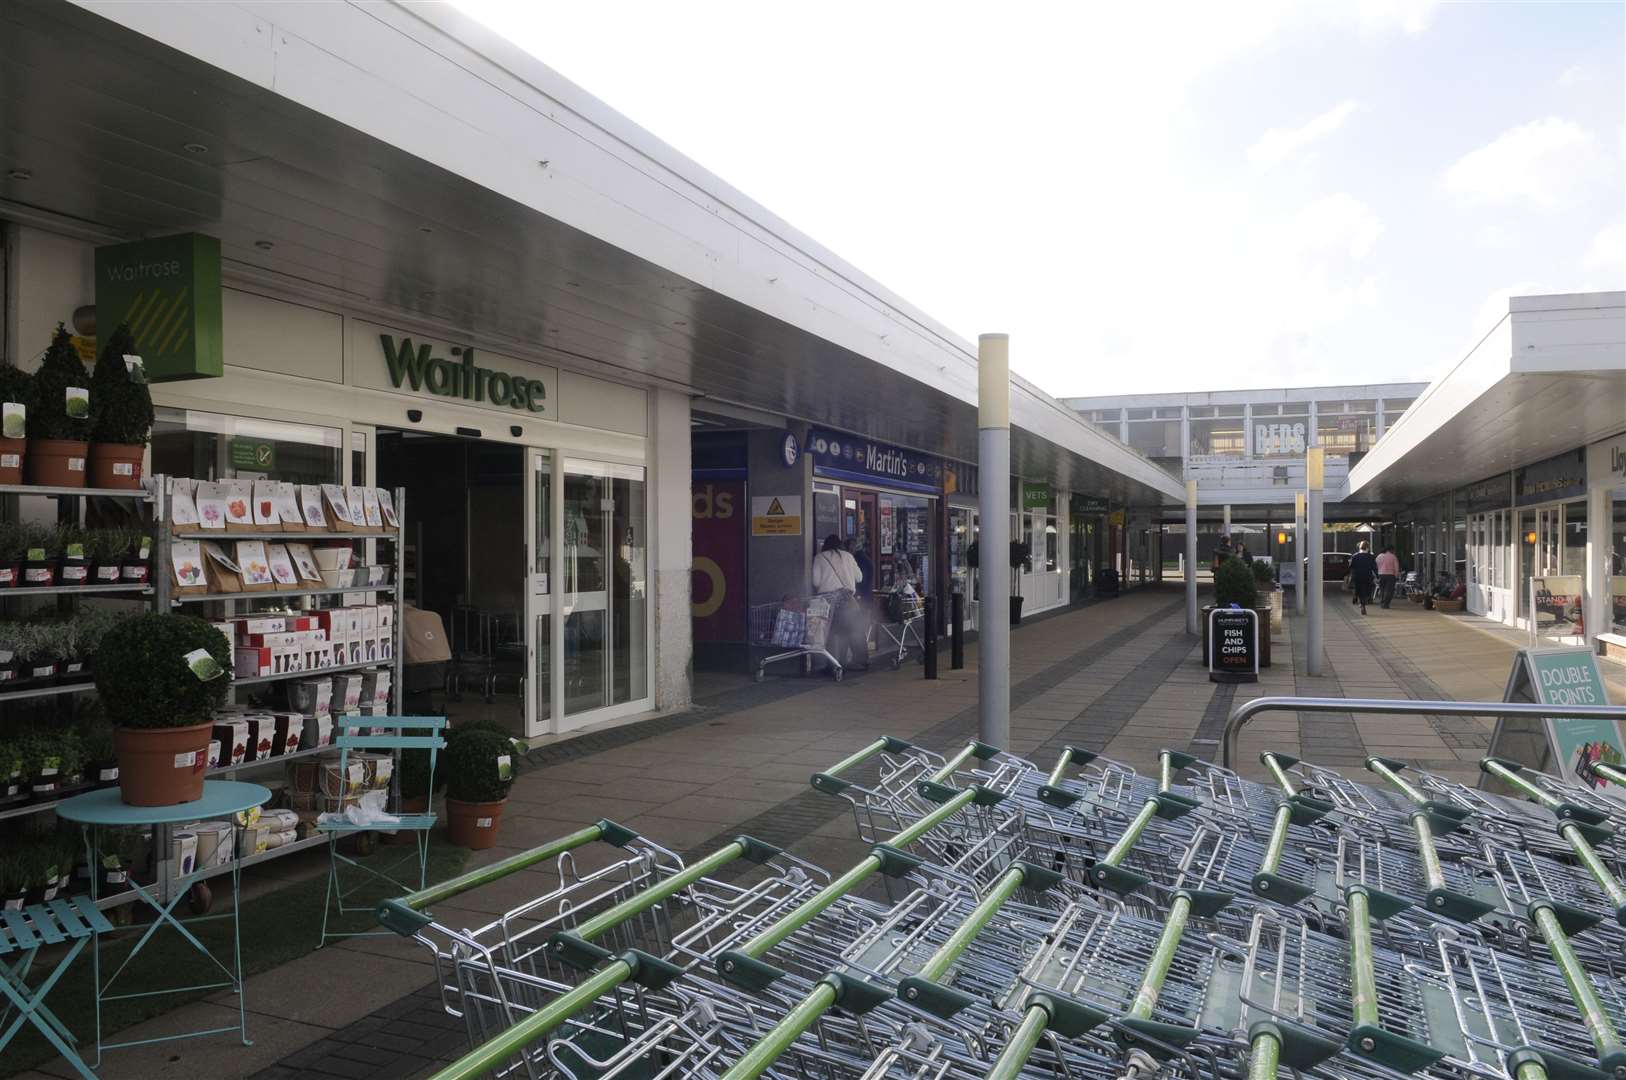 Waitrose has a branch in the Mid Kent Shopping Centre. Picture: Ruth Cuerden